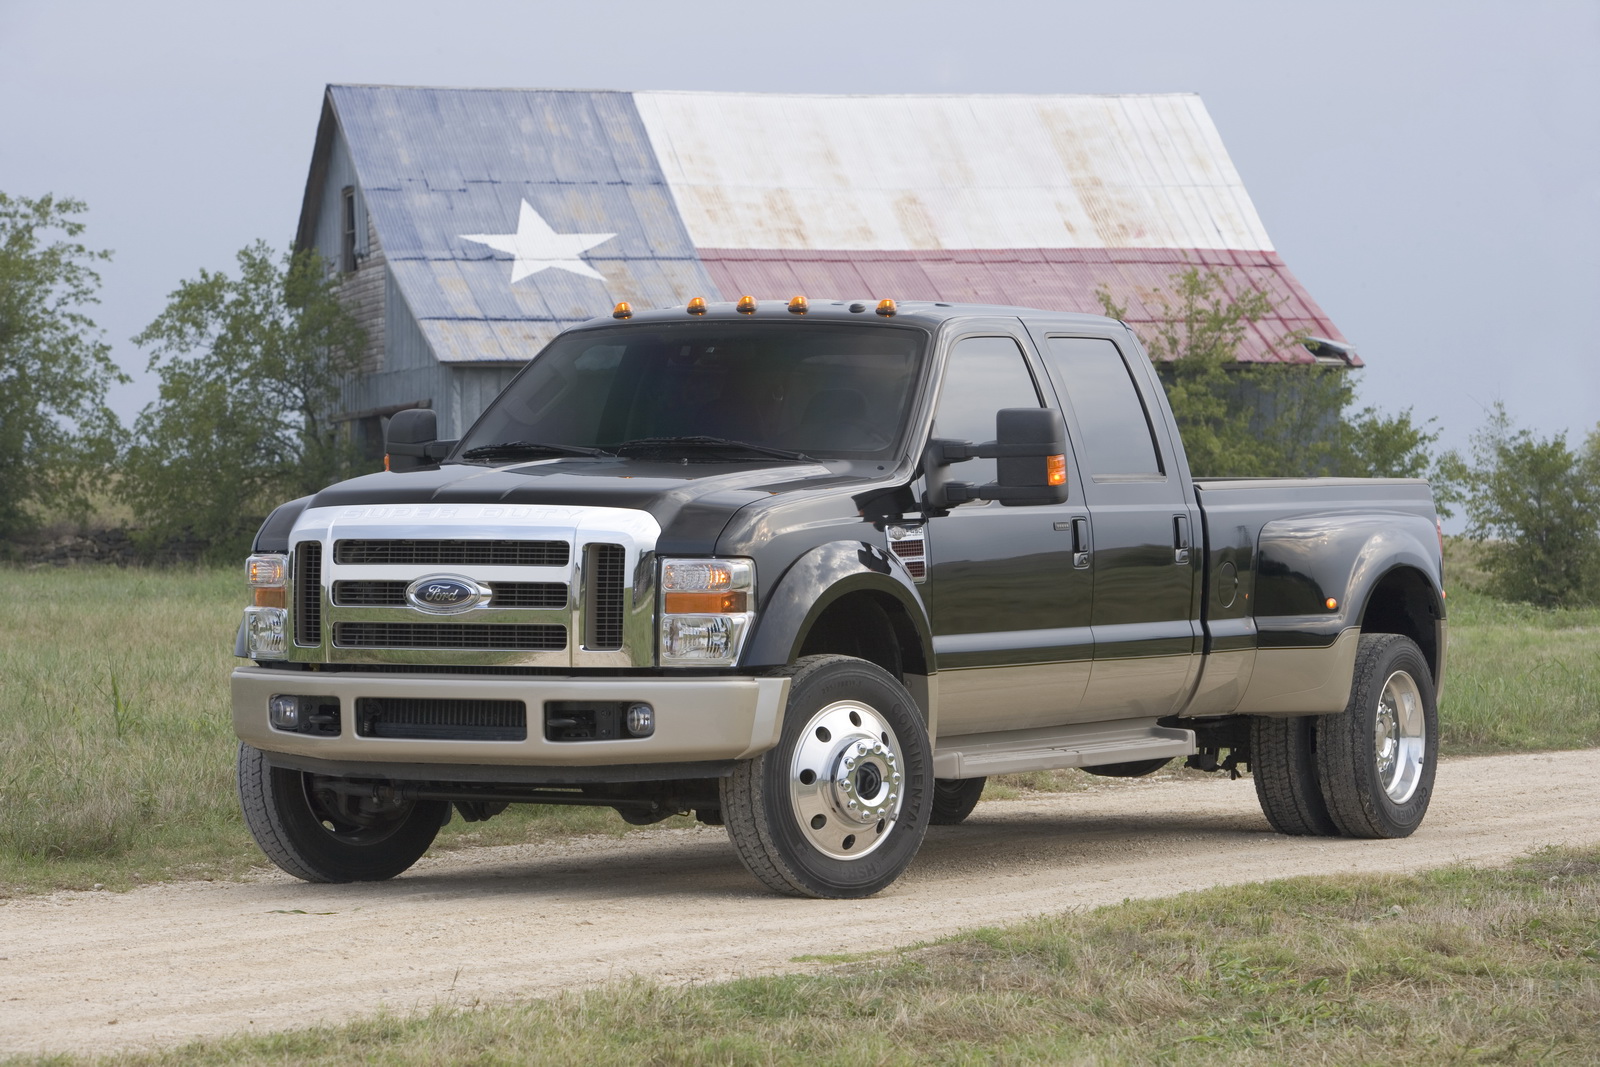 Henry Ford’s vision to create a vehicle with a cab and work-duty frame capable of accommodating cargo beds and third-party upfit equipment proudly endures a century later in the Built Ford Tough F-Series lineup – from F-150 to F-750 Super Duty